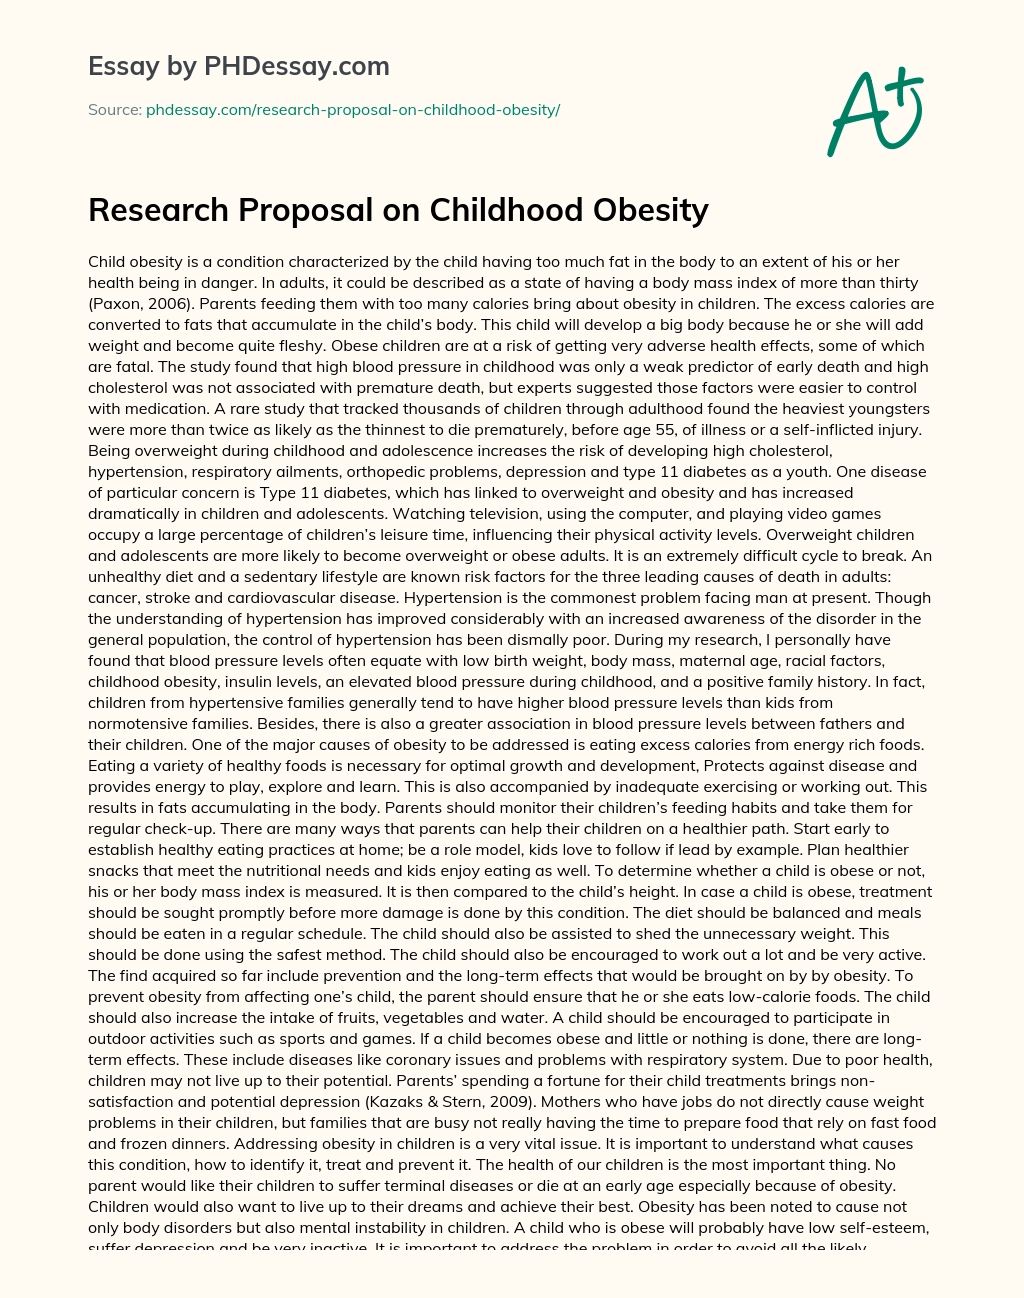 Research Proposal on Childhood Obesity essay